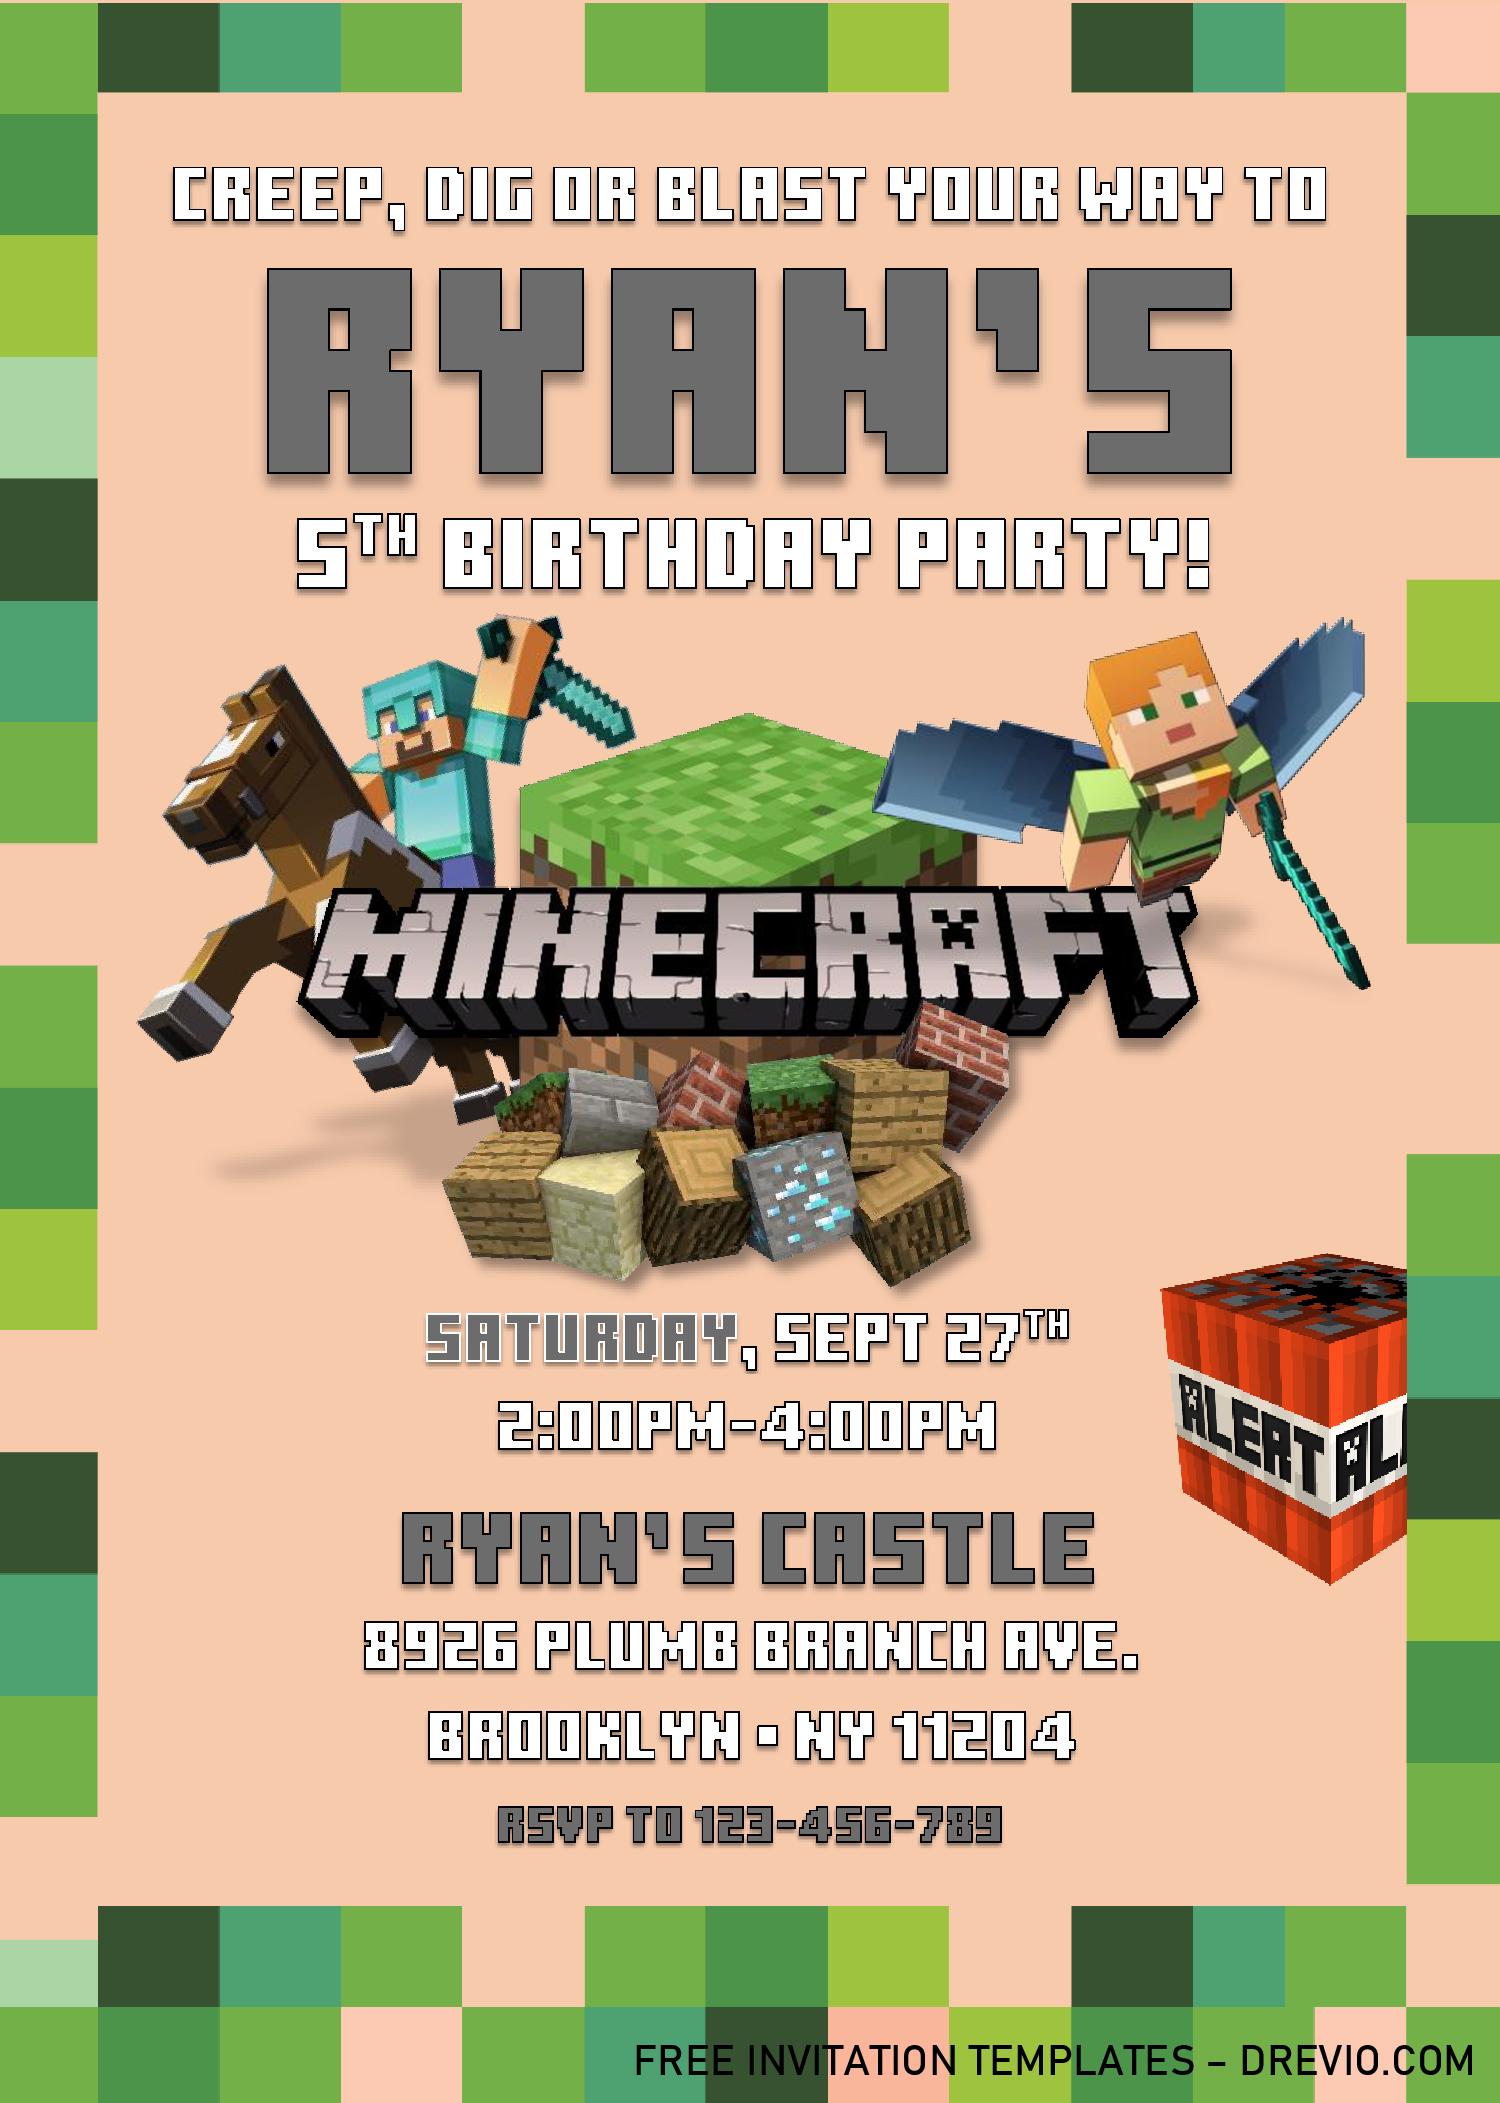 Minecraft Birthday Invitation Templates Editable With Ms Word Download Hundreds Free Printable Birthday Invitation Templates